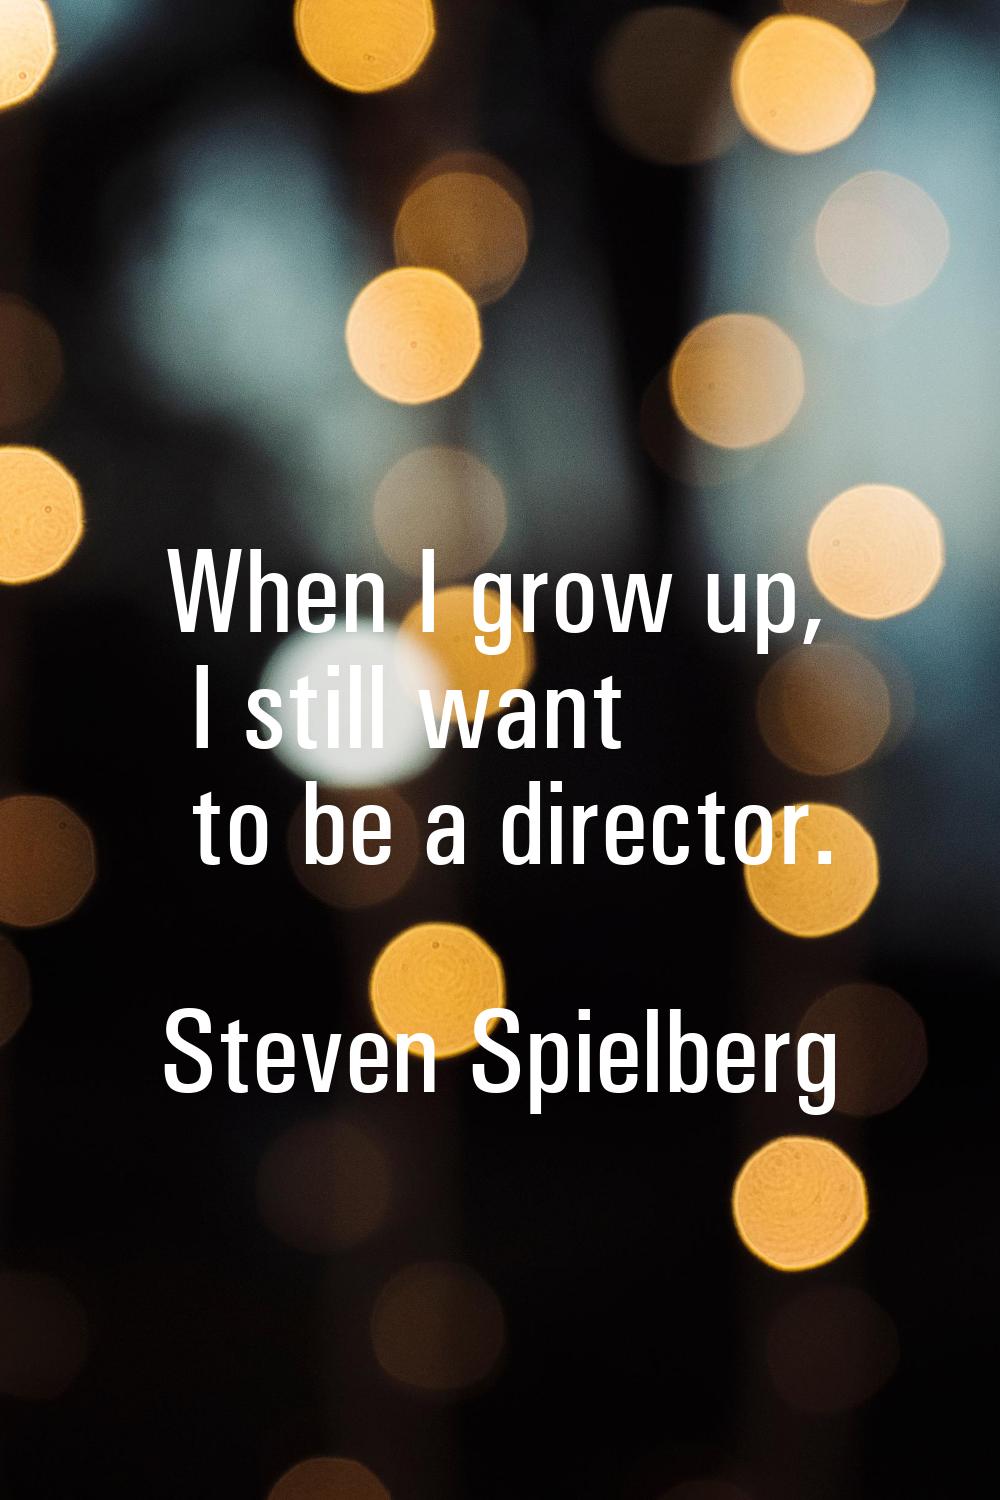 When I grow up, I still want to be a director.